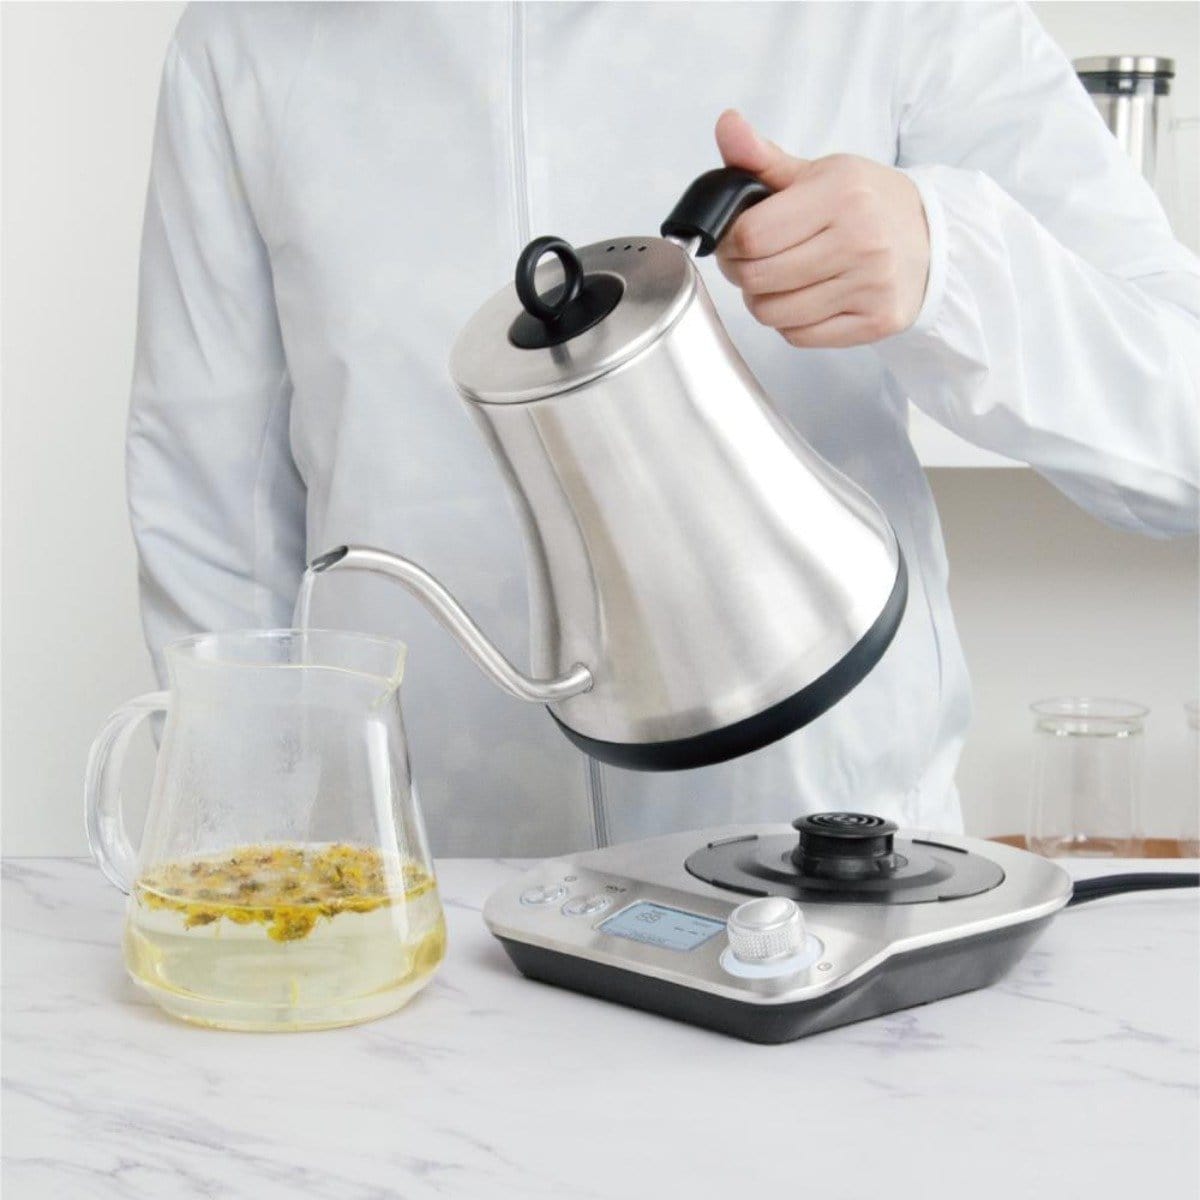 A person in a white jacket is pouring hot water from a Magic Hour Electric Pour Over Kettle into a glass pitcher containing Magic Hour Tea's yellow loose-leaf tea. The kettle, heated on an electric base with digital controls, rests on a white marble countertop.